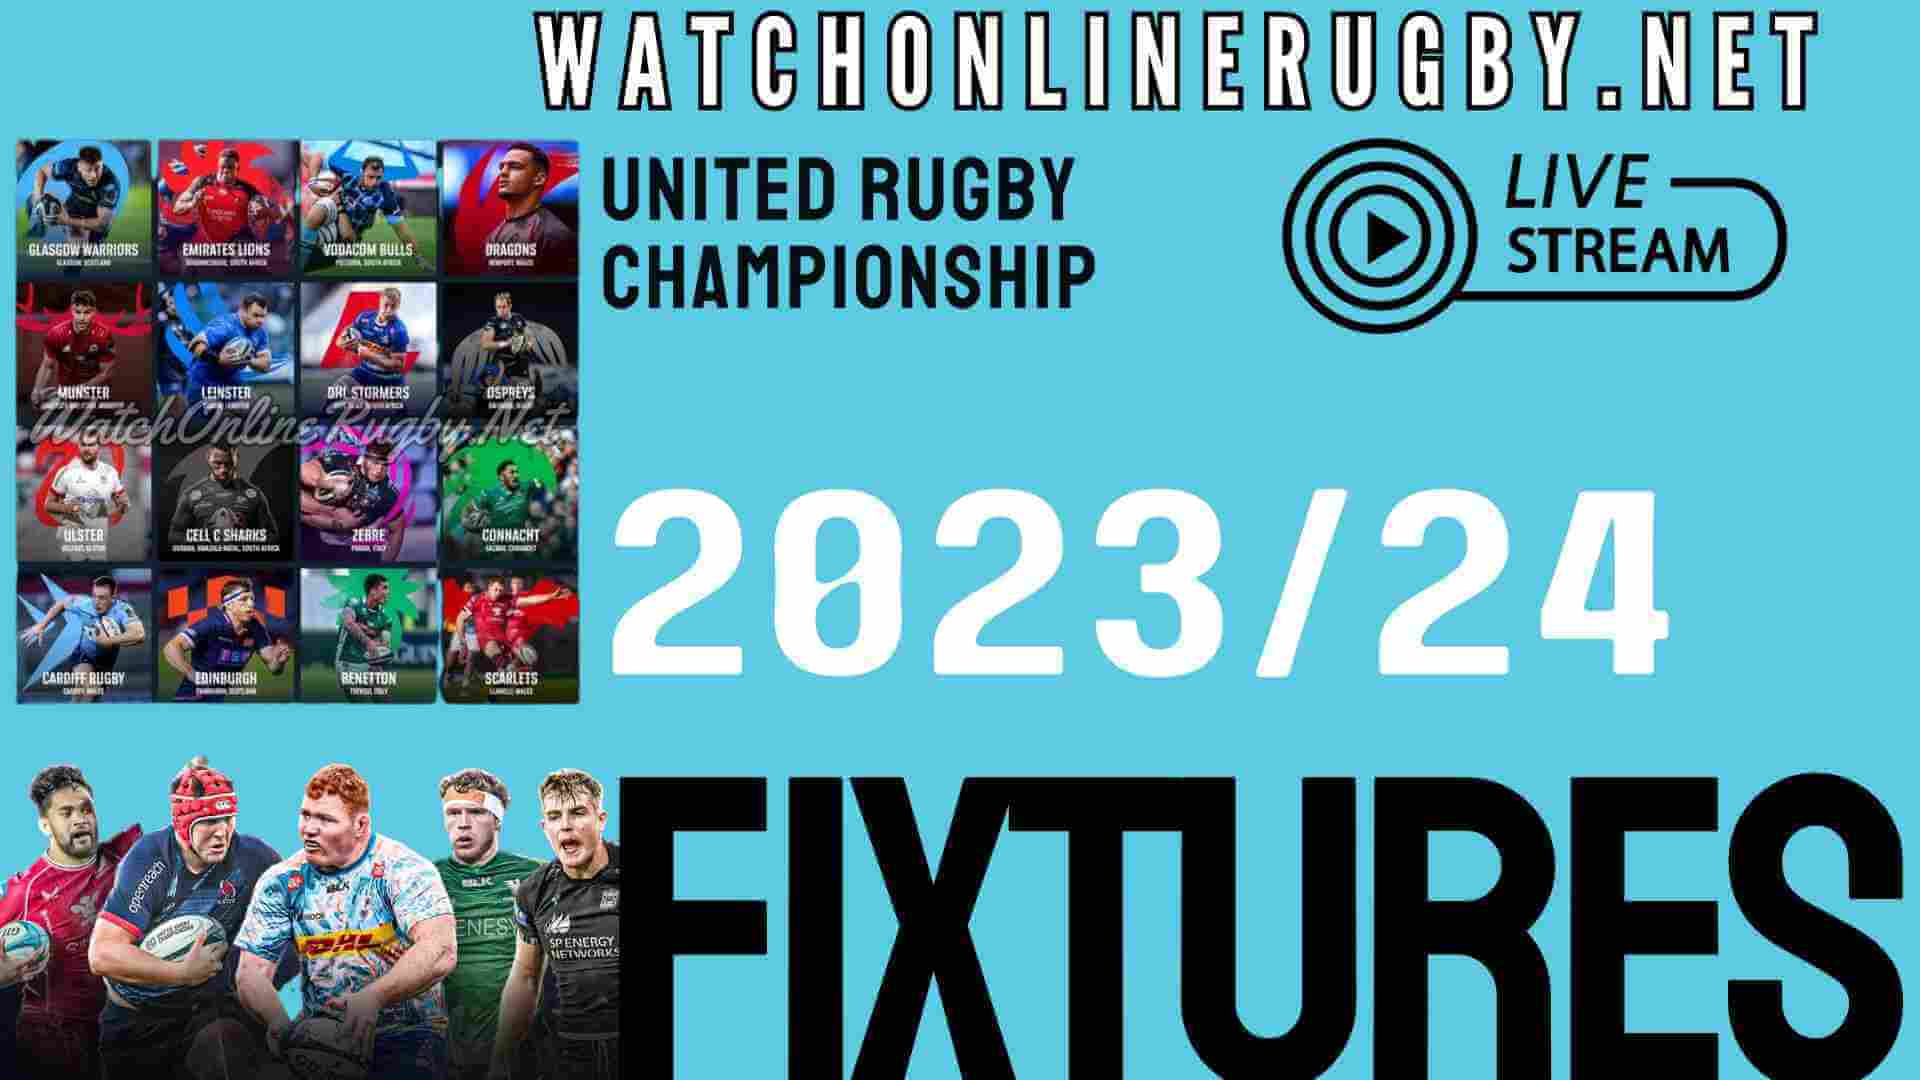 United Rugby Championship 2021-22 Fixtures Announced & Live Stream